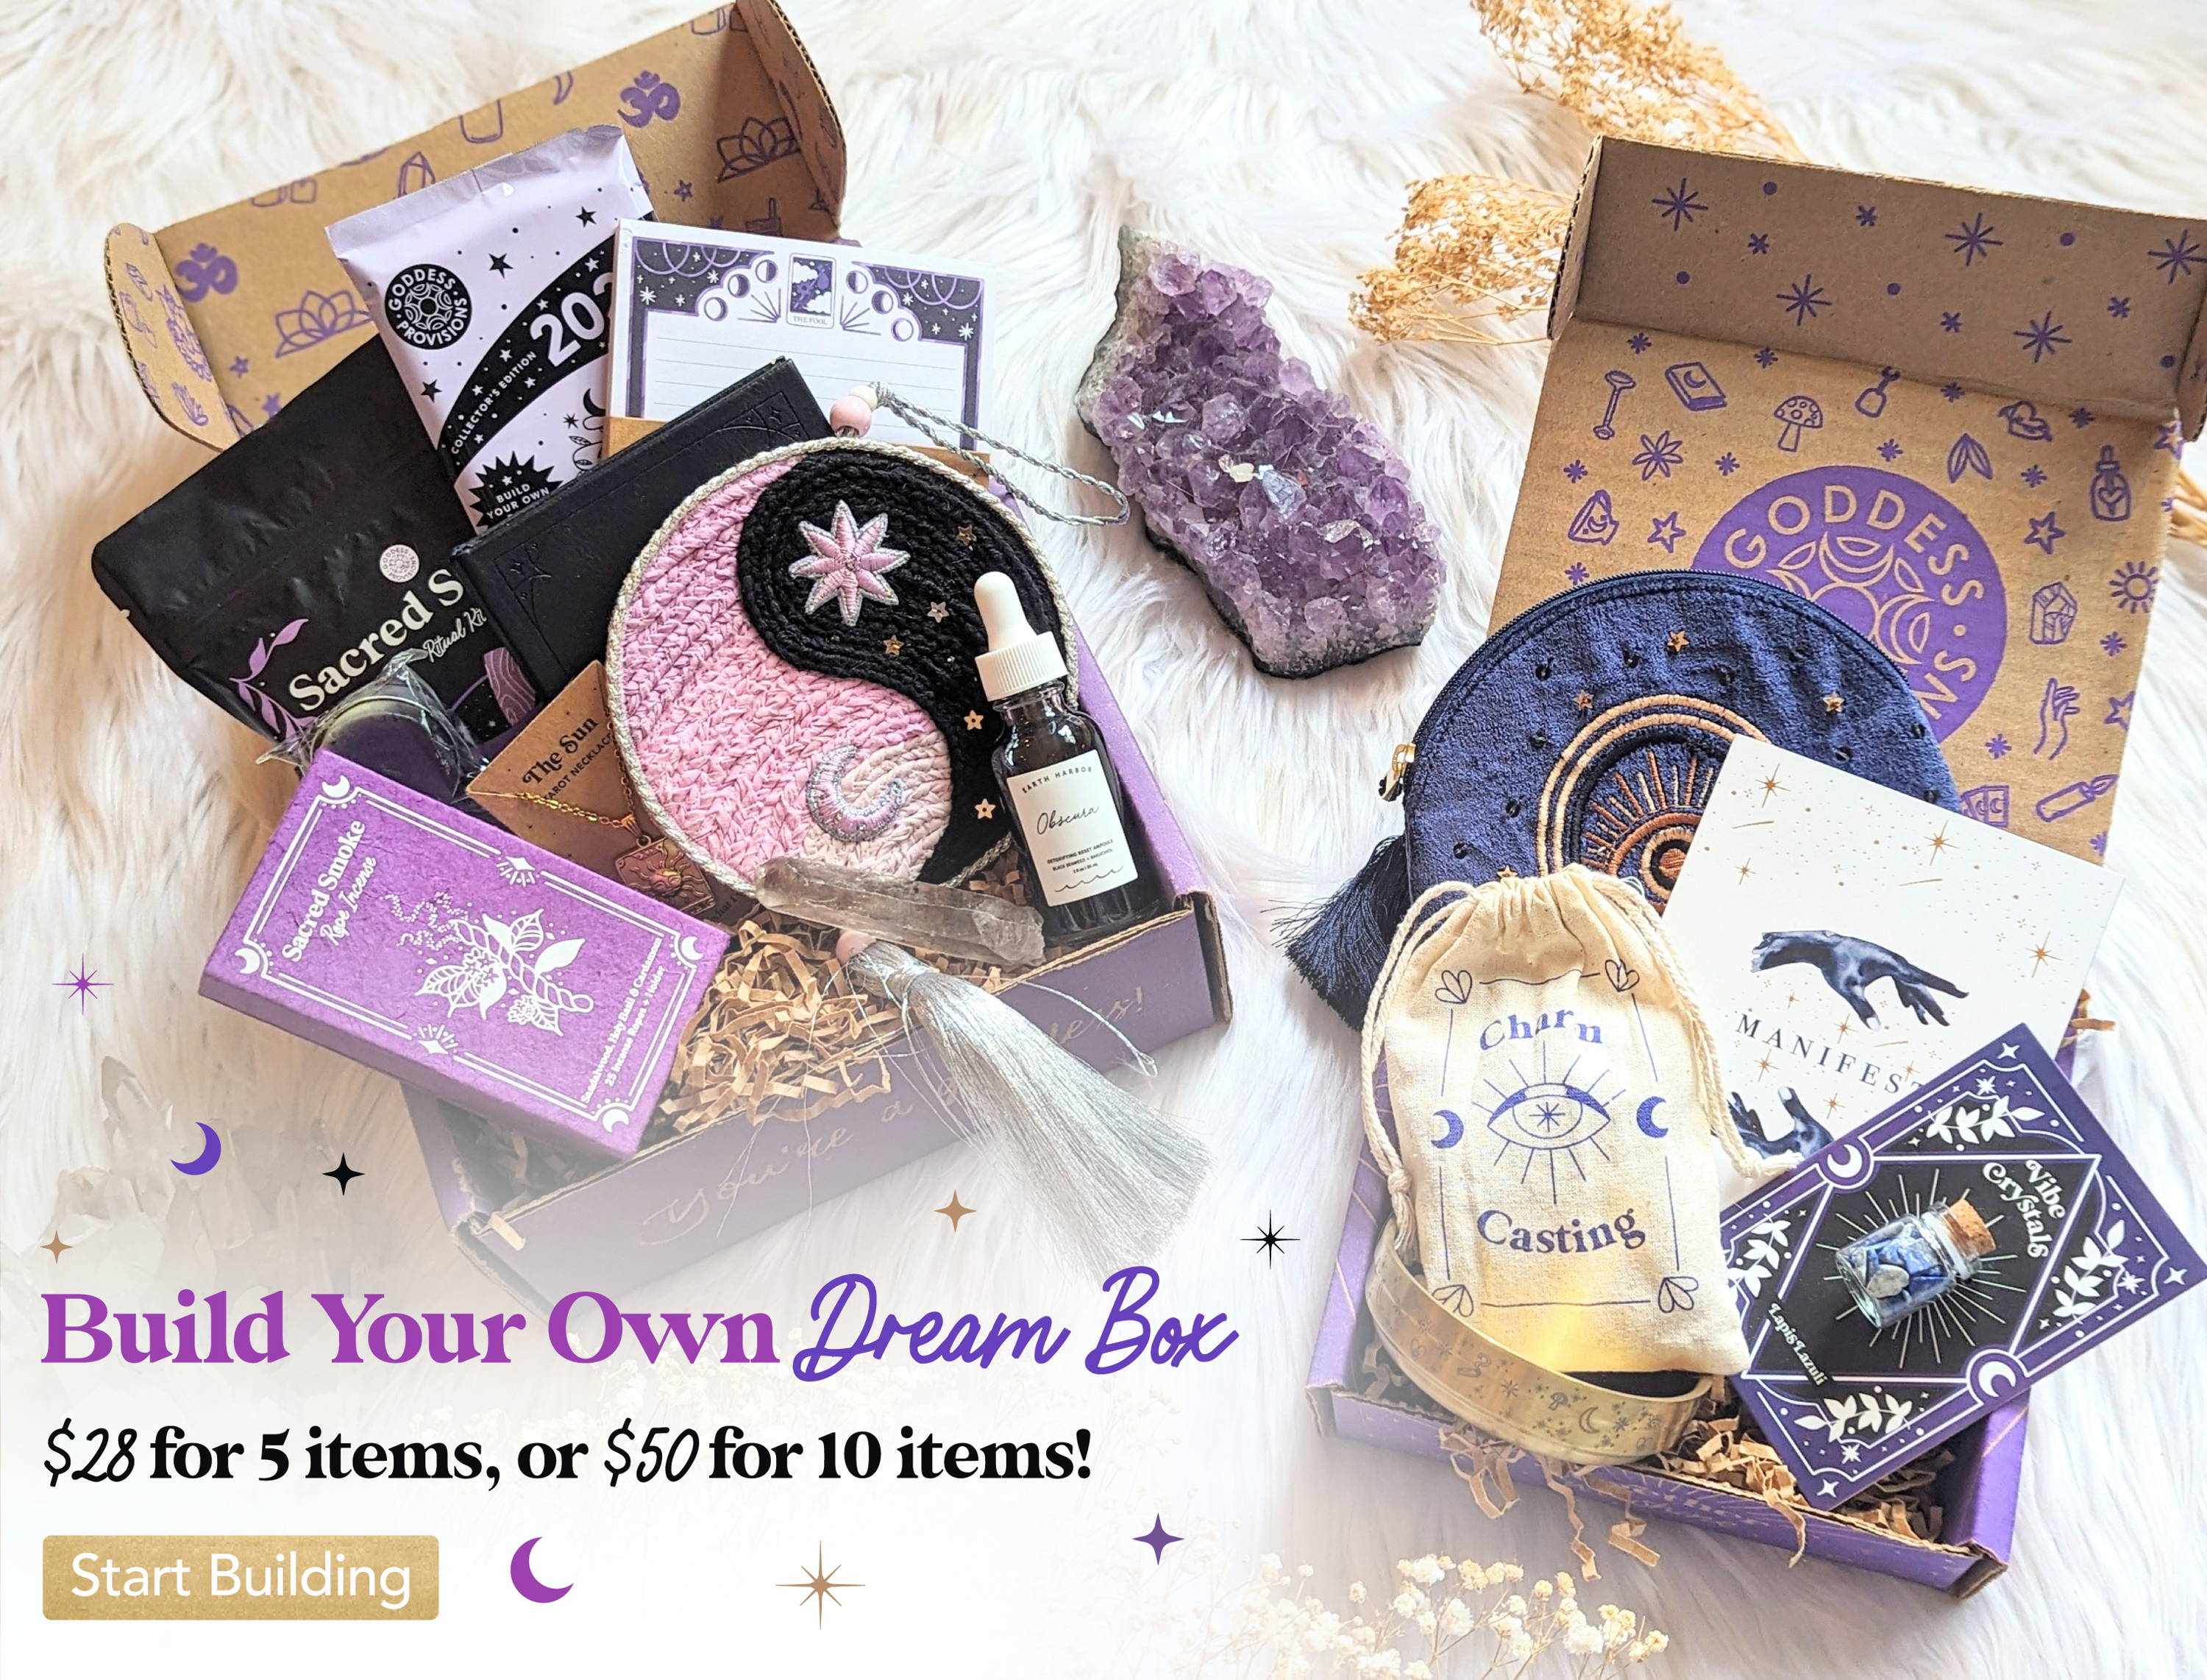 Build Your Own Dream Box